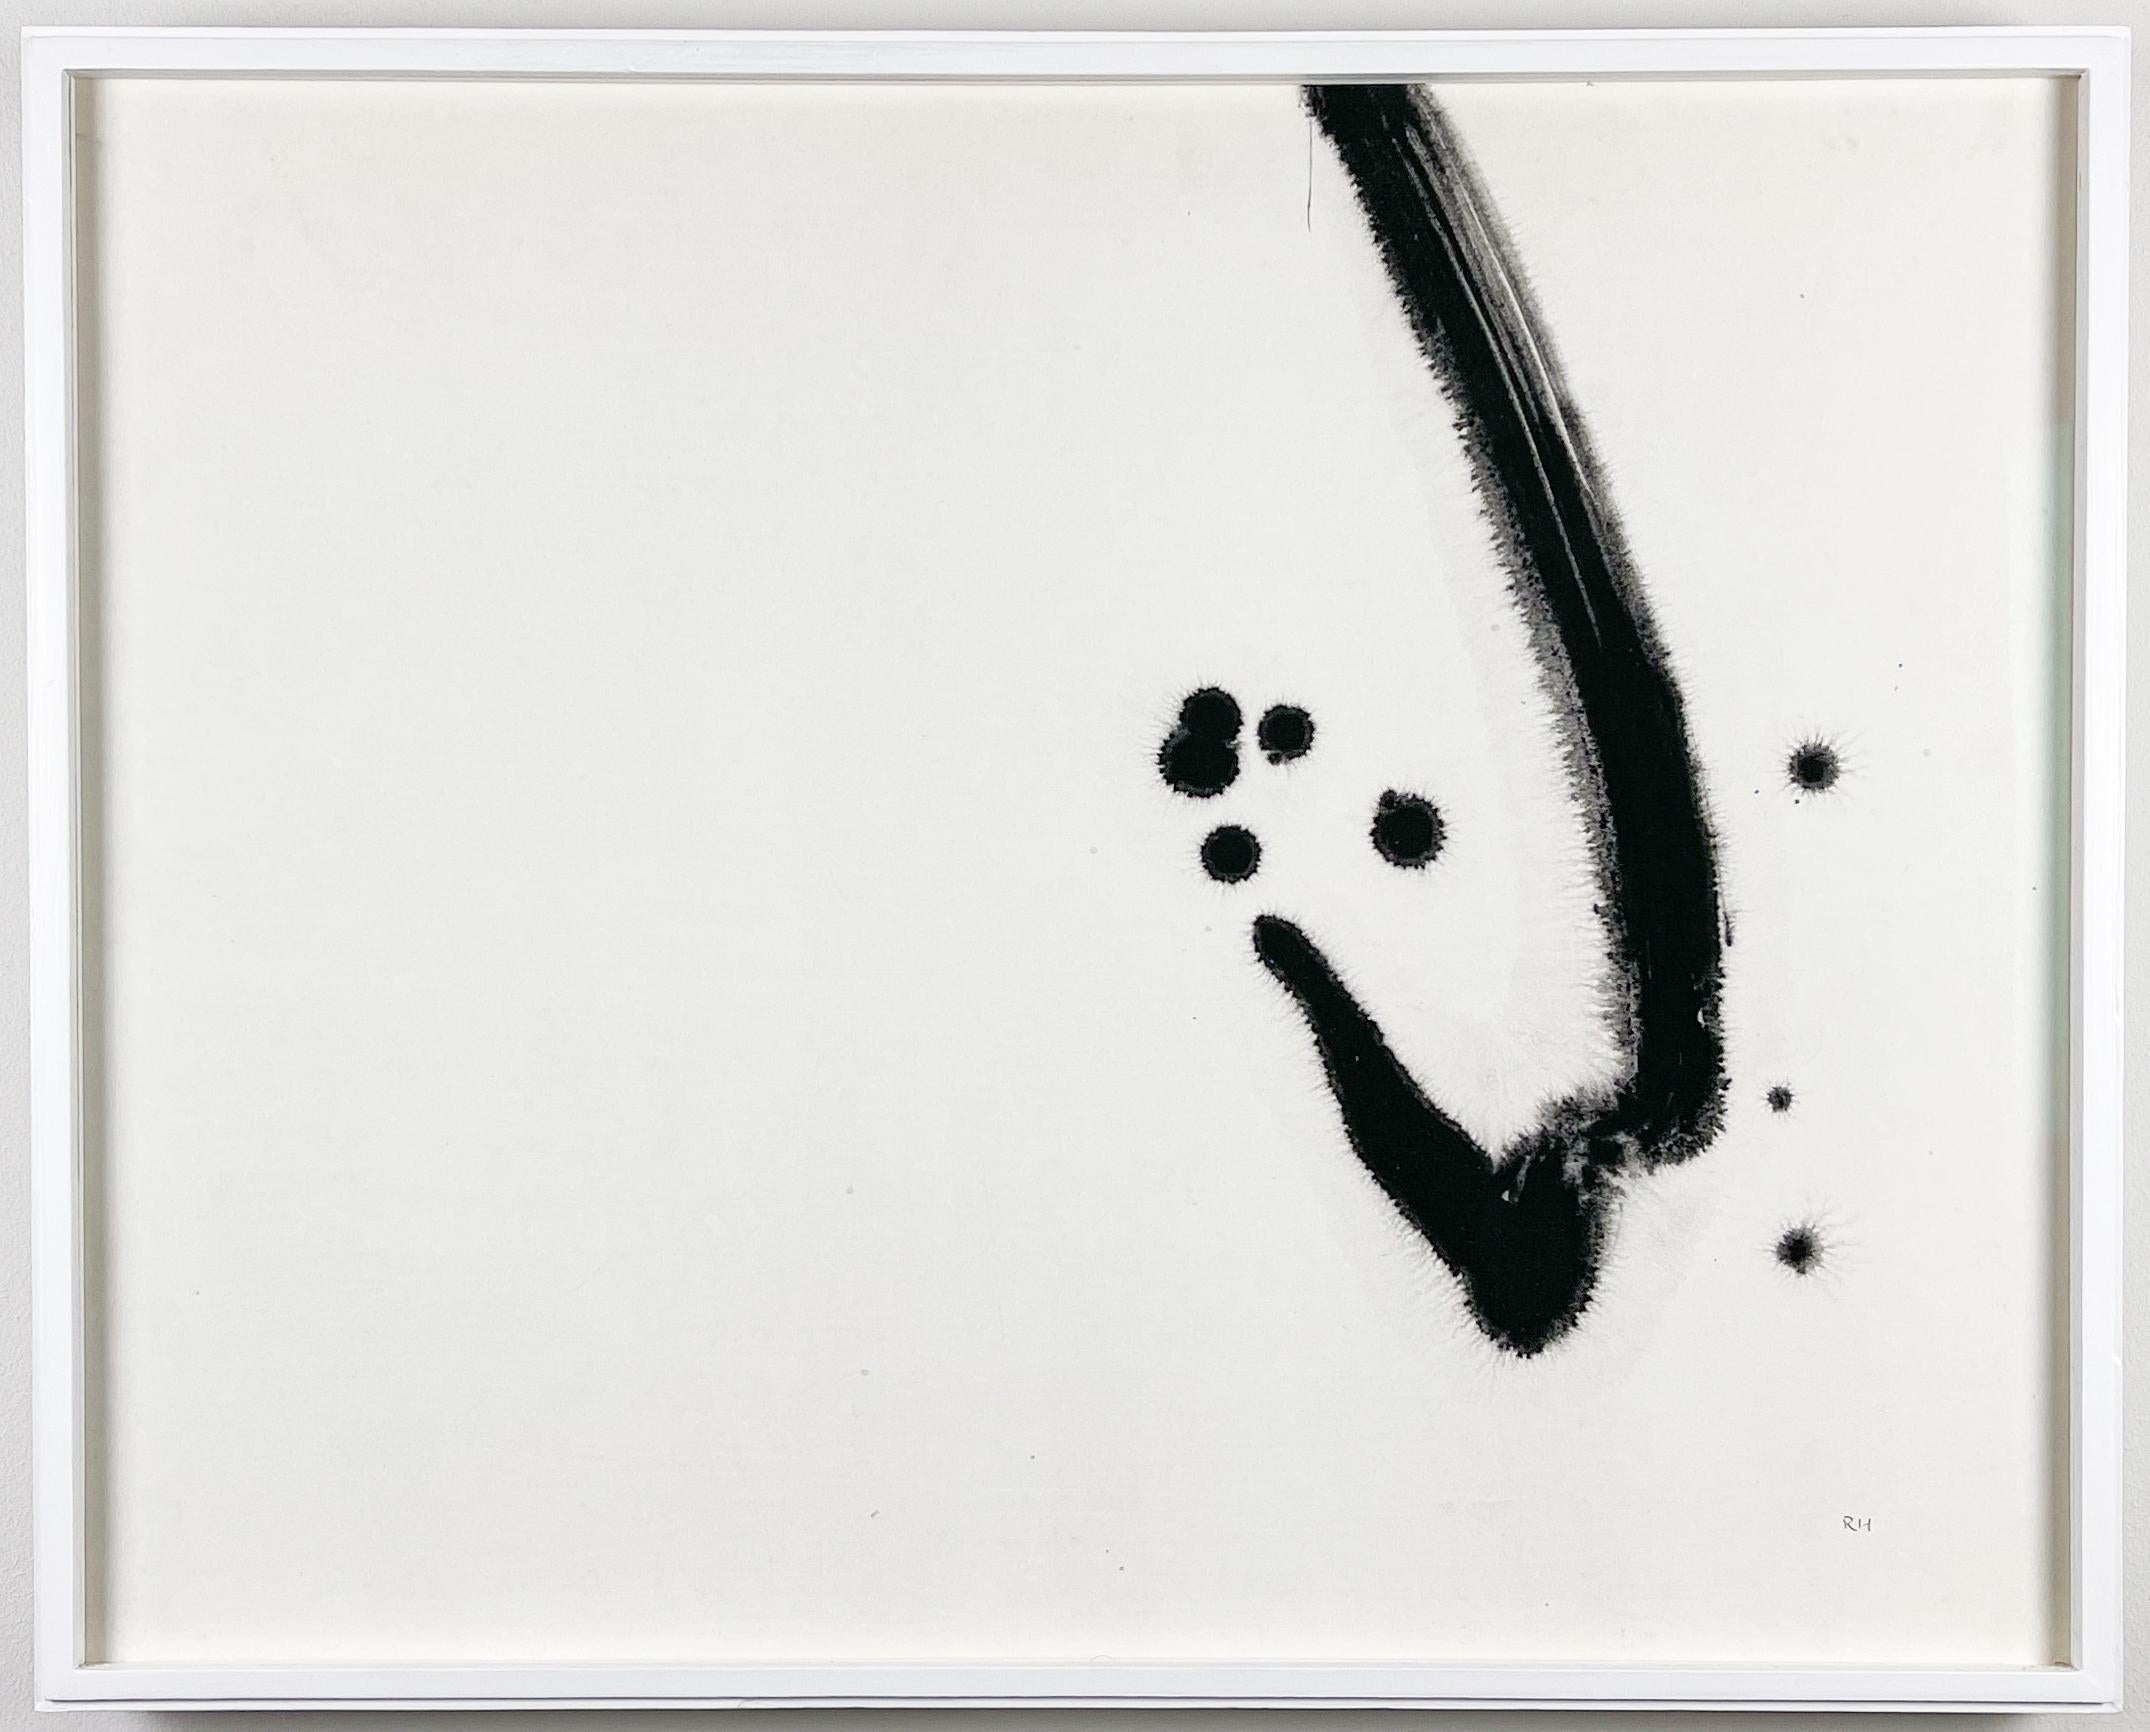 Rune Hagberg – “Composition”, circa 1965

Rune Hagberg painted this artwork circa 1965, using ink on paper laid down on board. The original white painted pinewood frame was preserved. We added museumglas to give the work UV protection and to